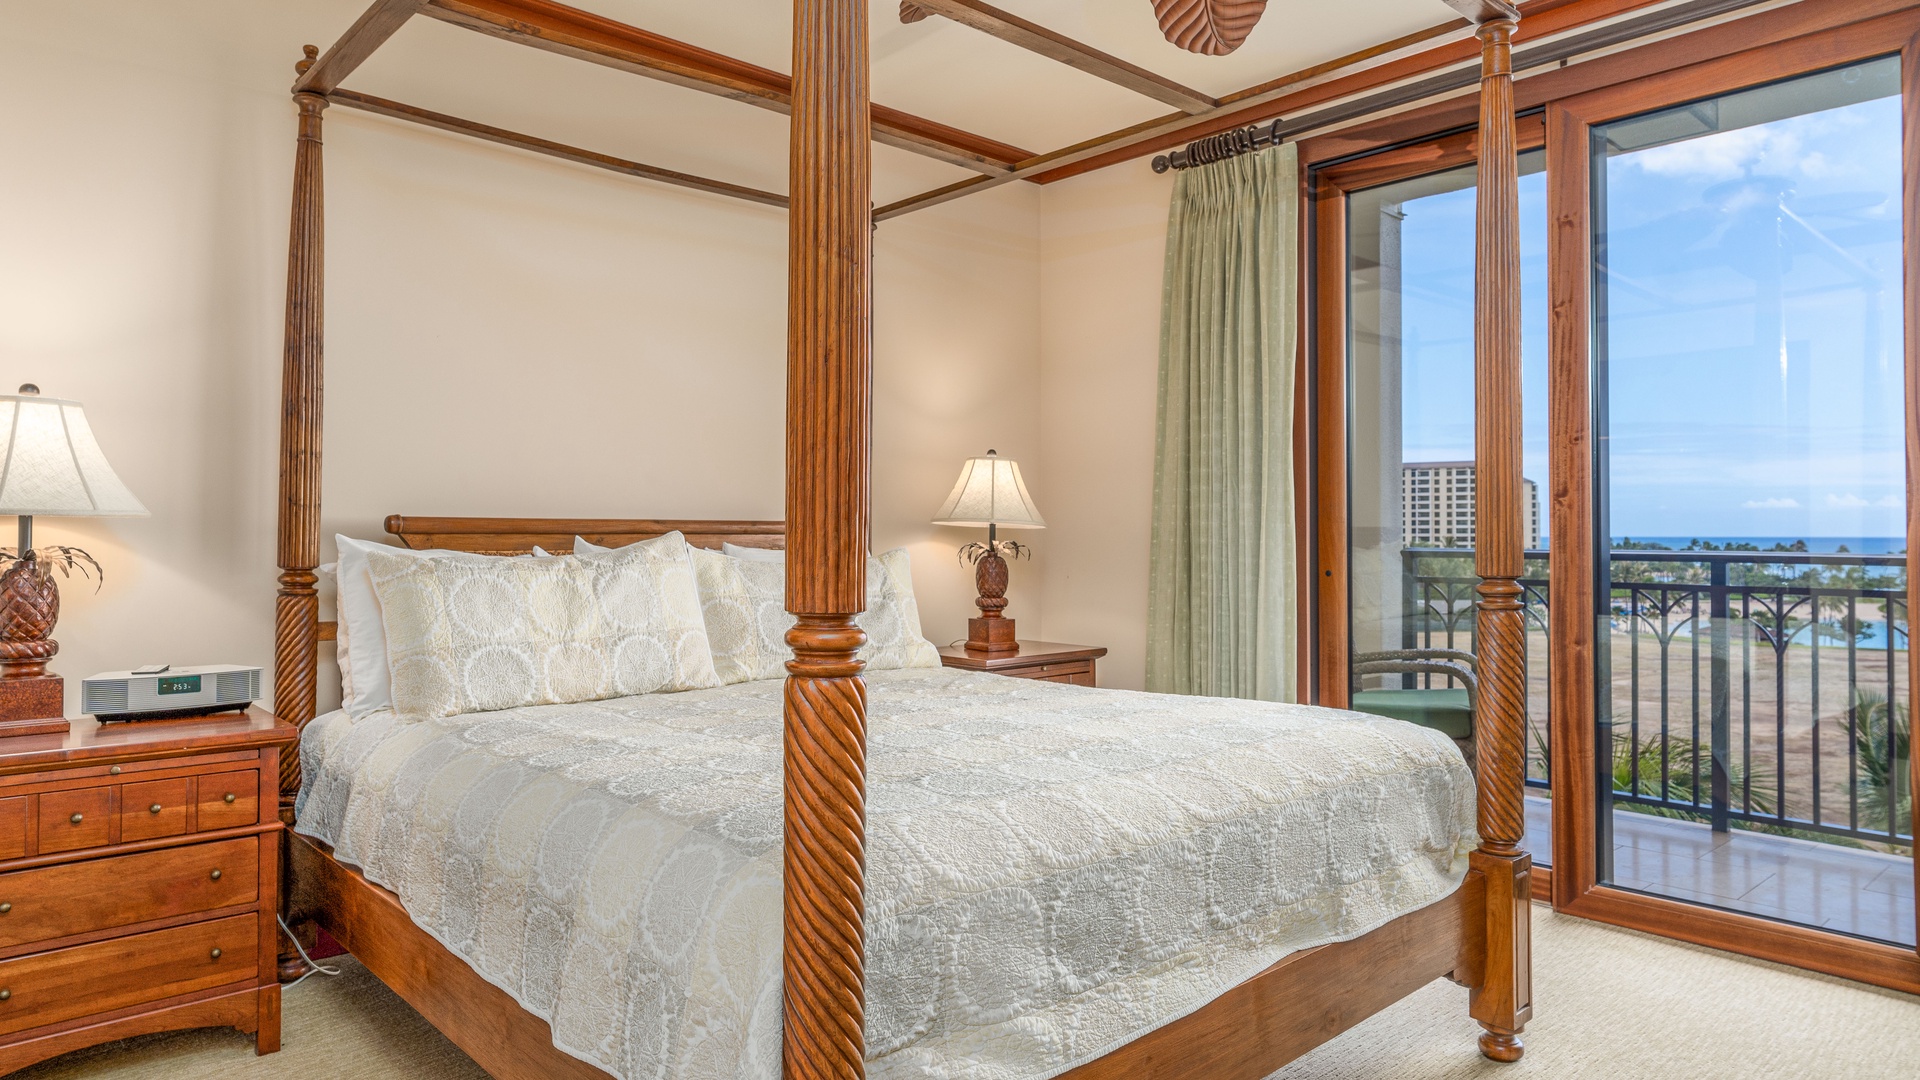 Kapolei Vacation Rentals, Ko Olina Beach Villas B701 - The primary guest bedroom fit for royalty with views for days.